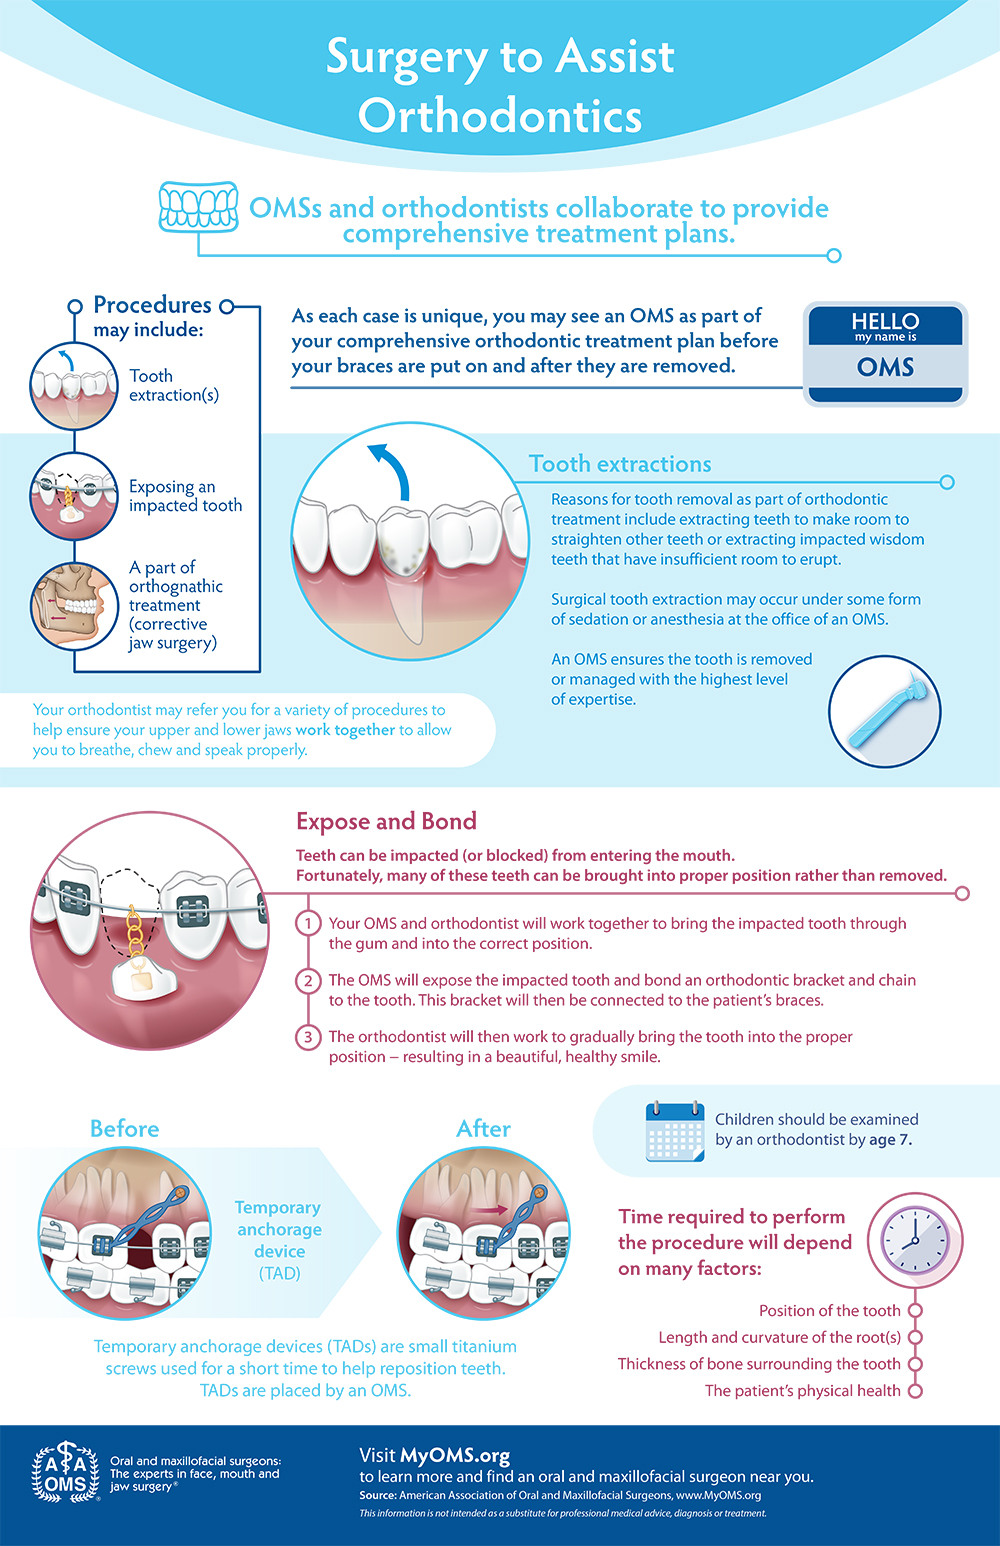 Surgery to Assist Orthodontics Infographic